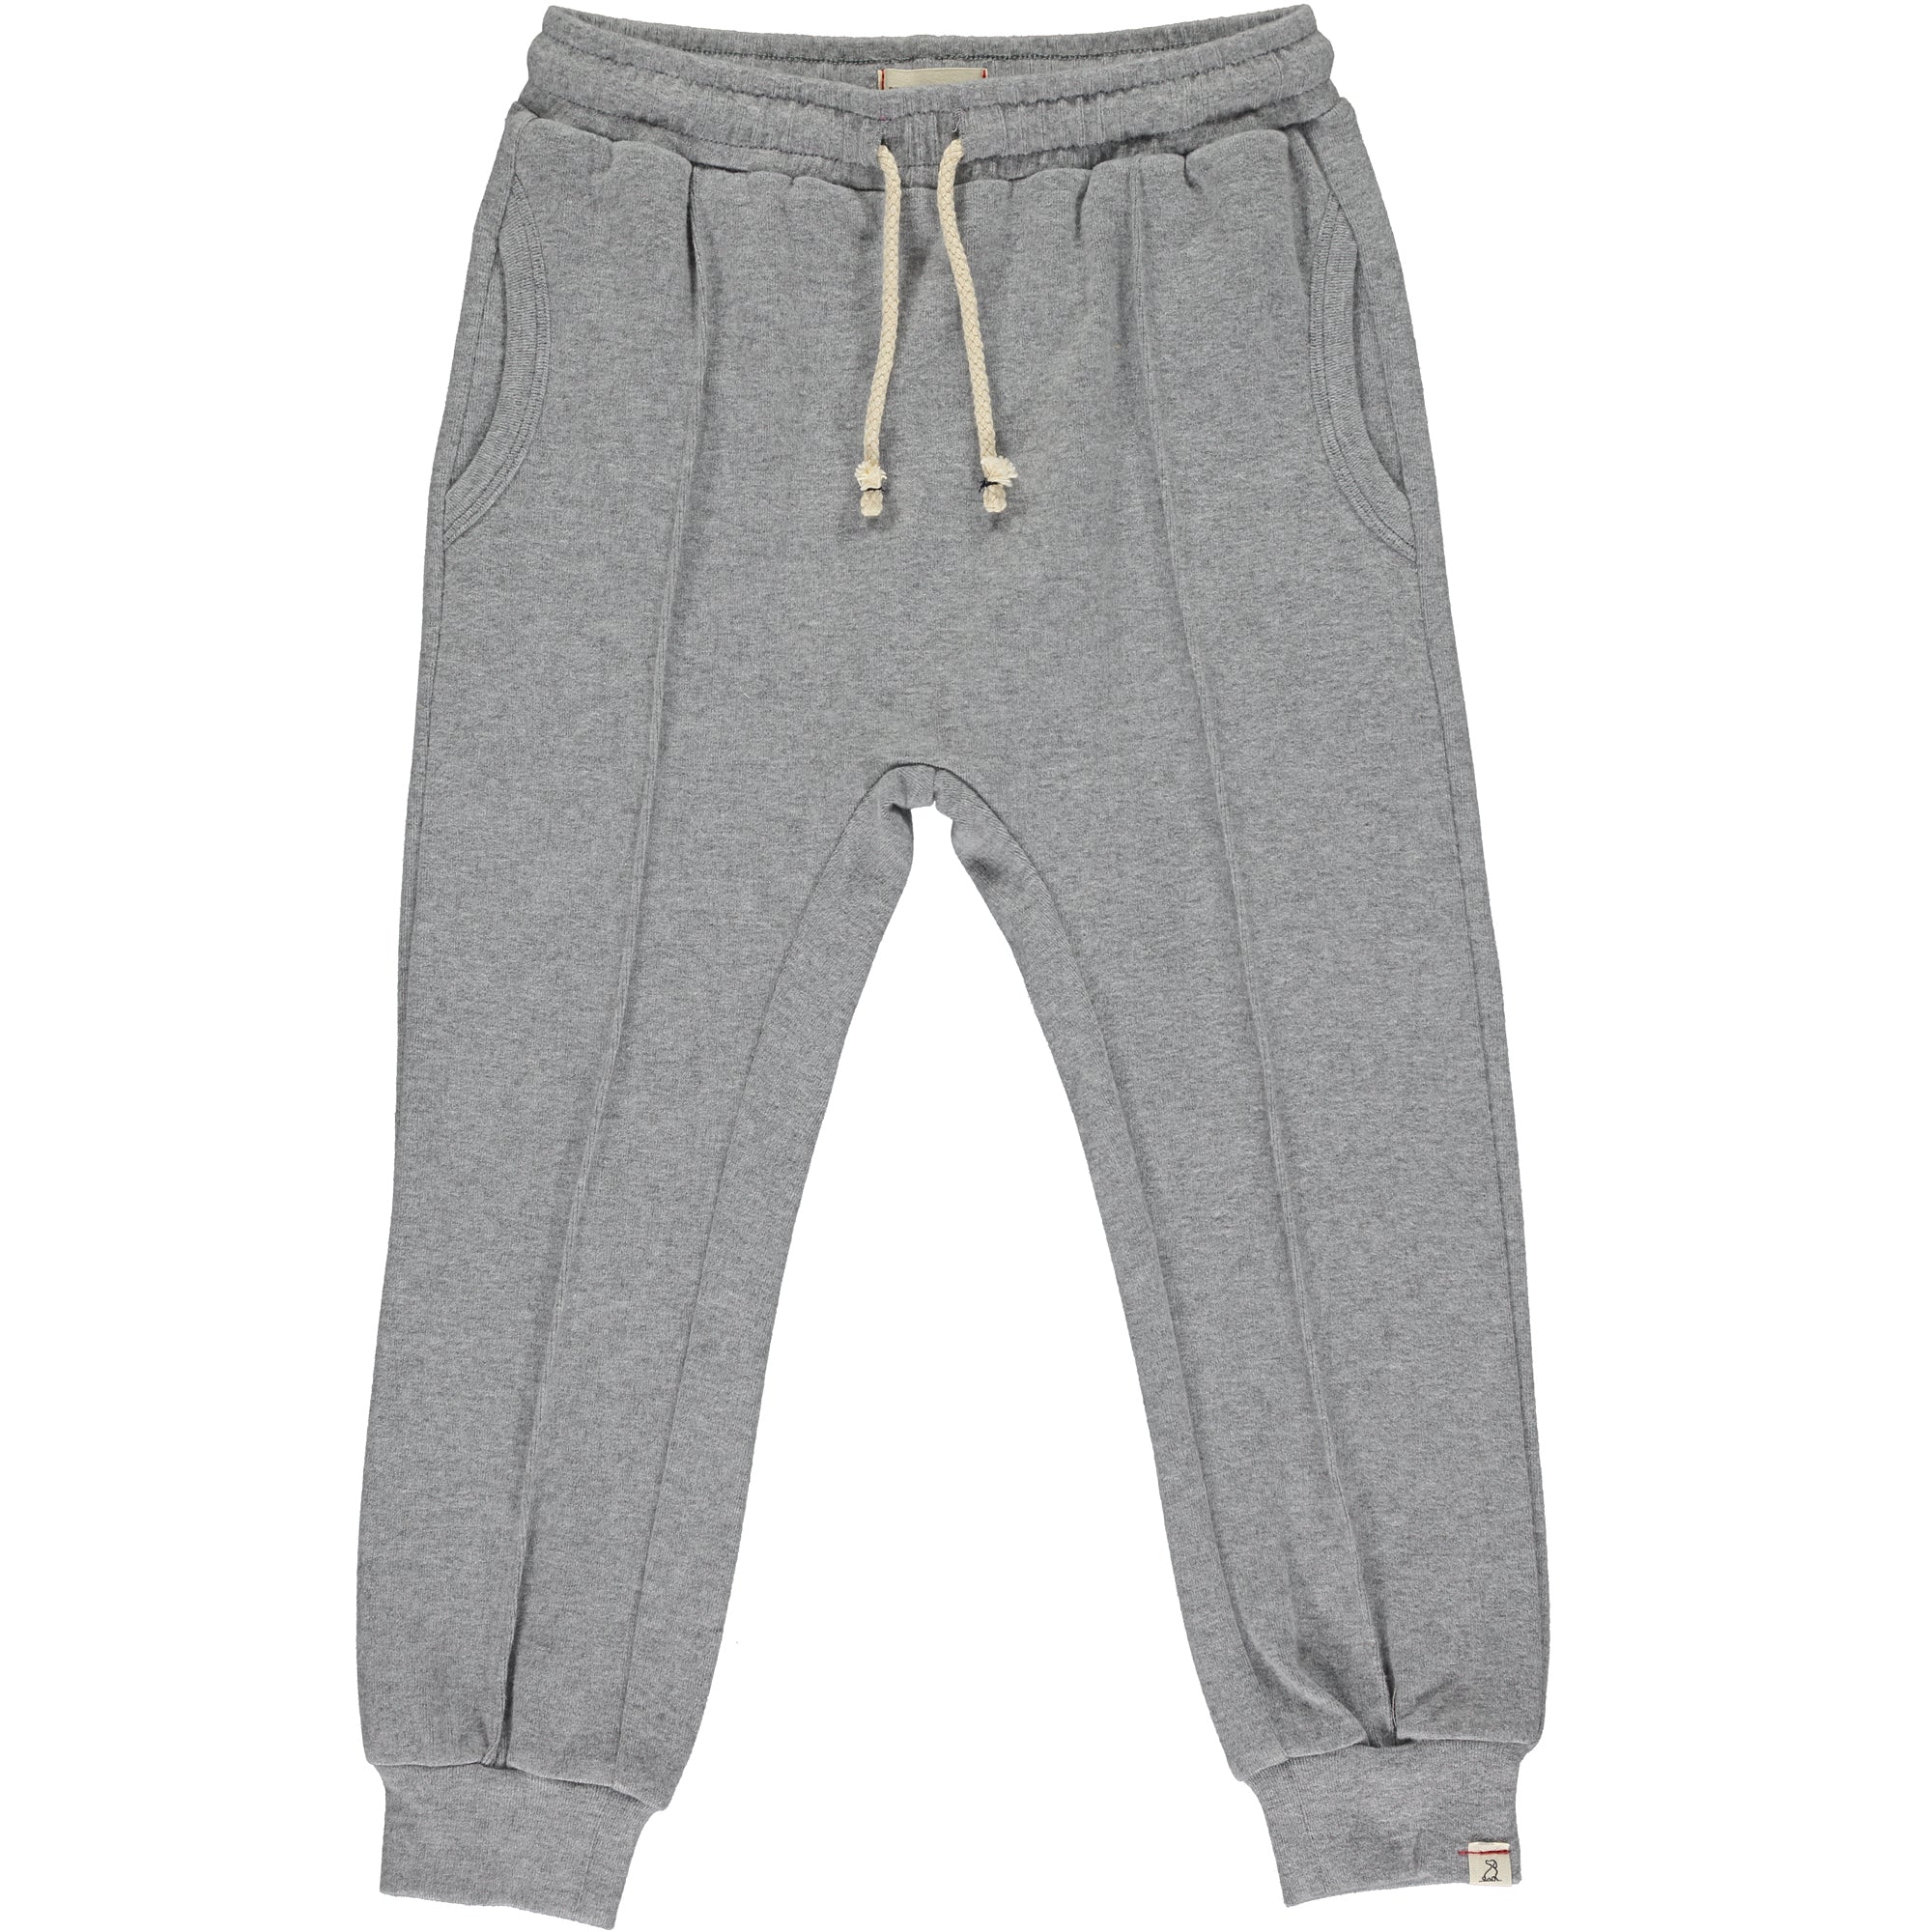 Mr Jek Children's sports trousers: for sale at 9.99€ on